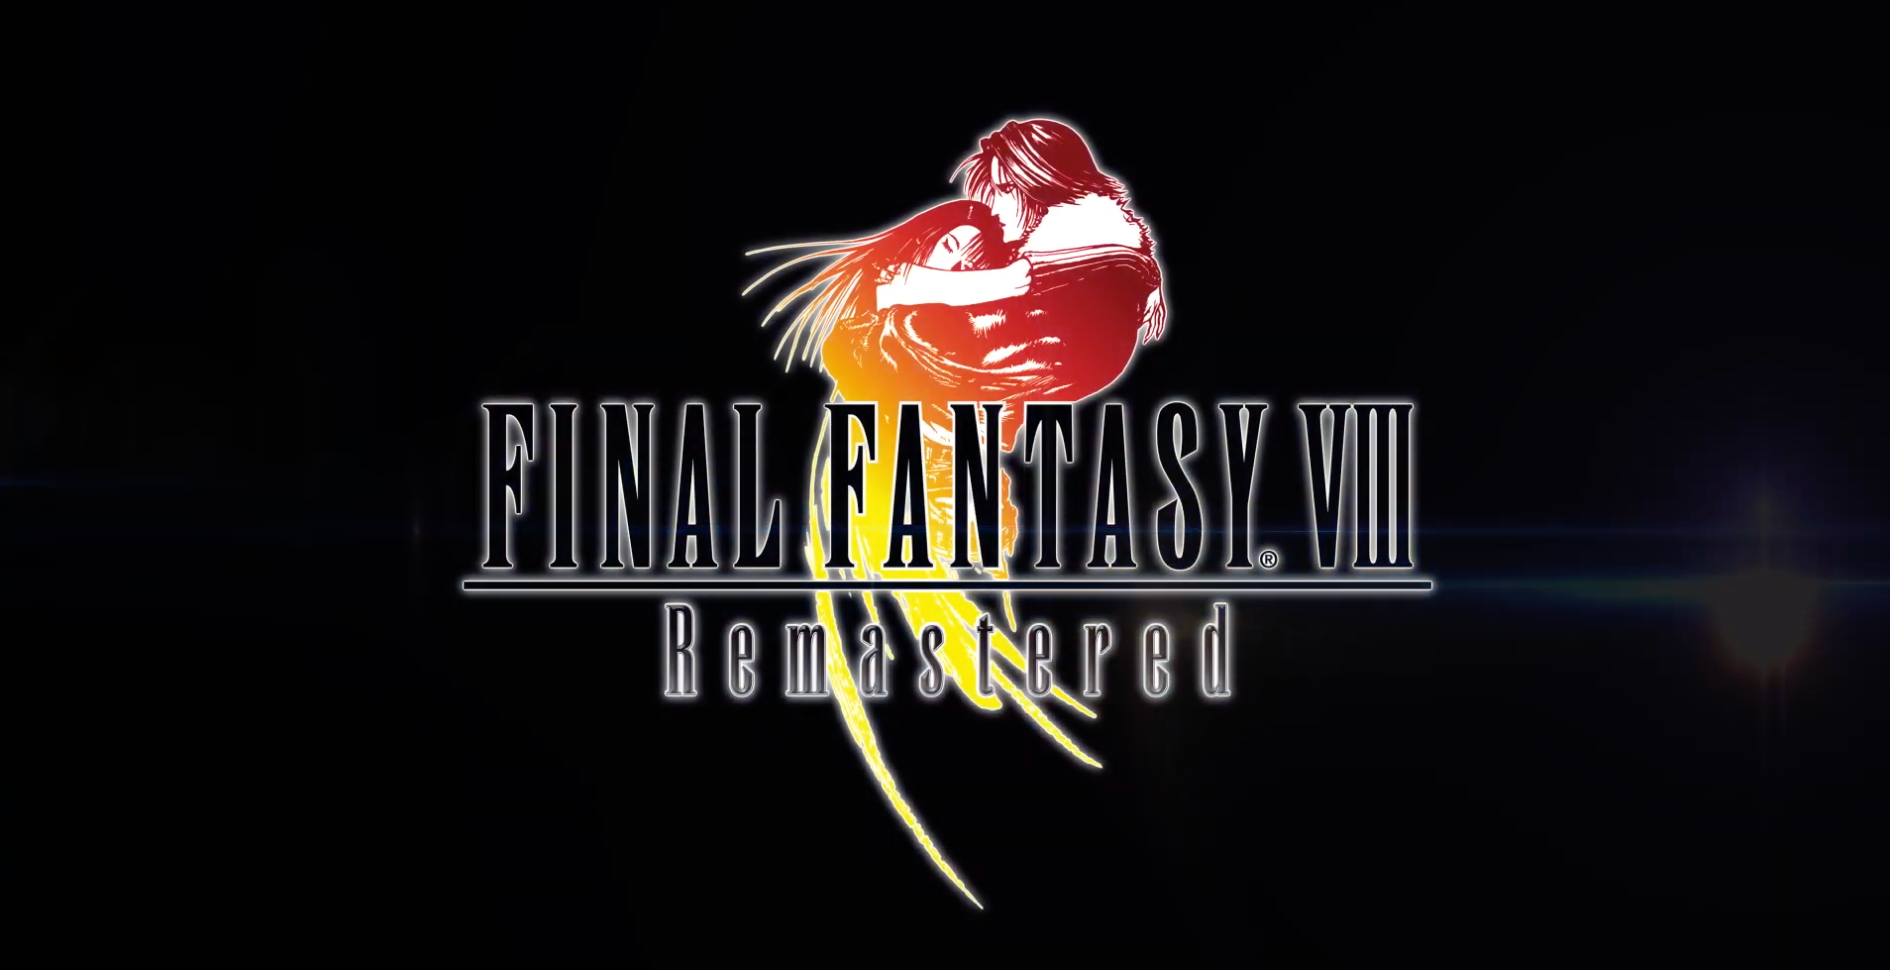 Final Fantasy VIII Remastered Launches on September 3rd